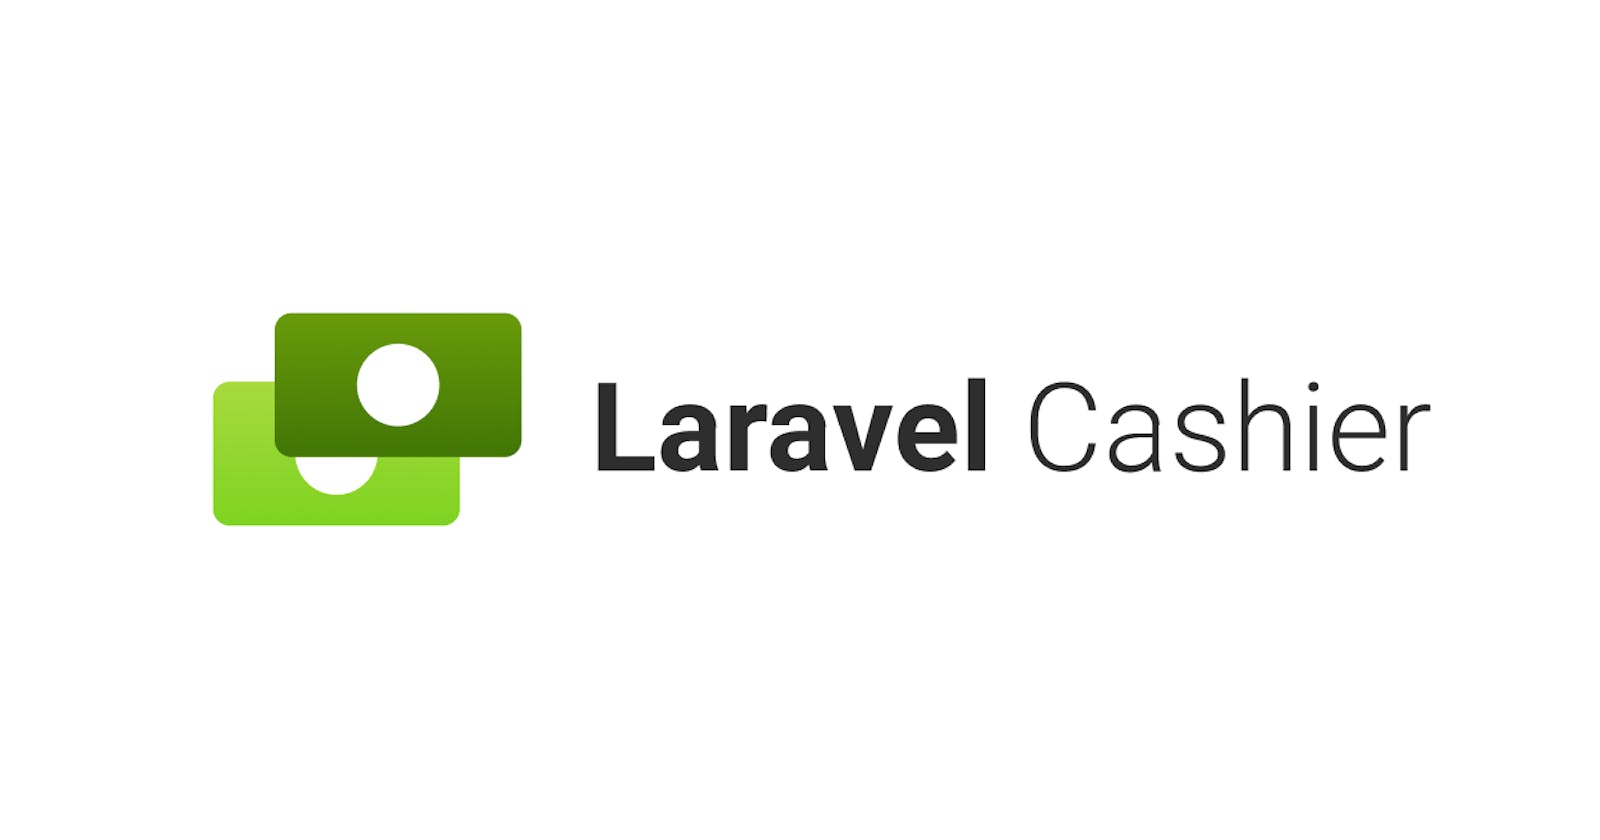 How to configure Laravel Cashier with multiple models